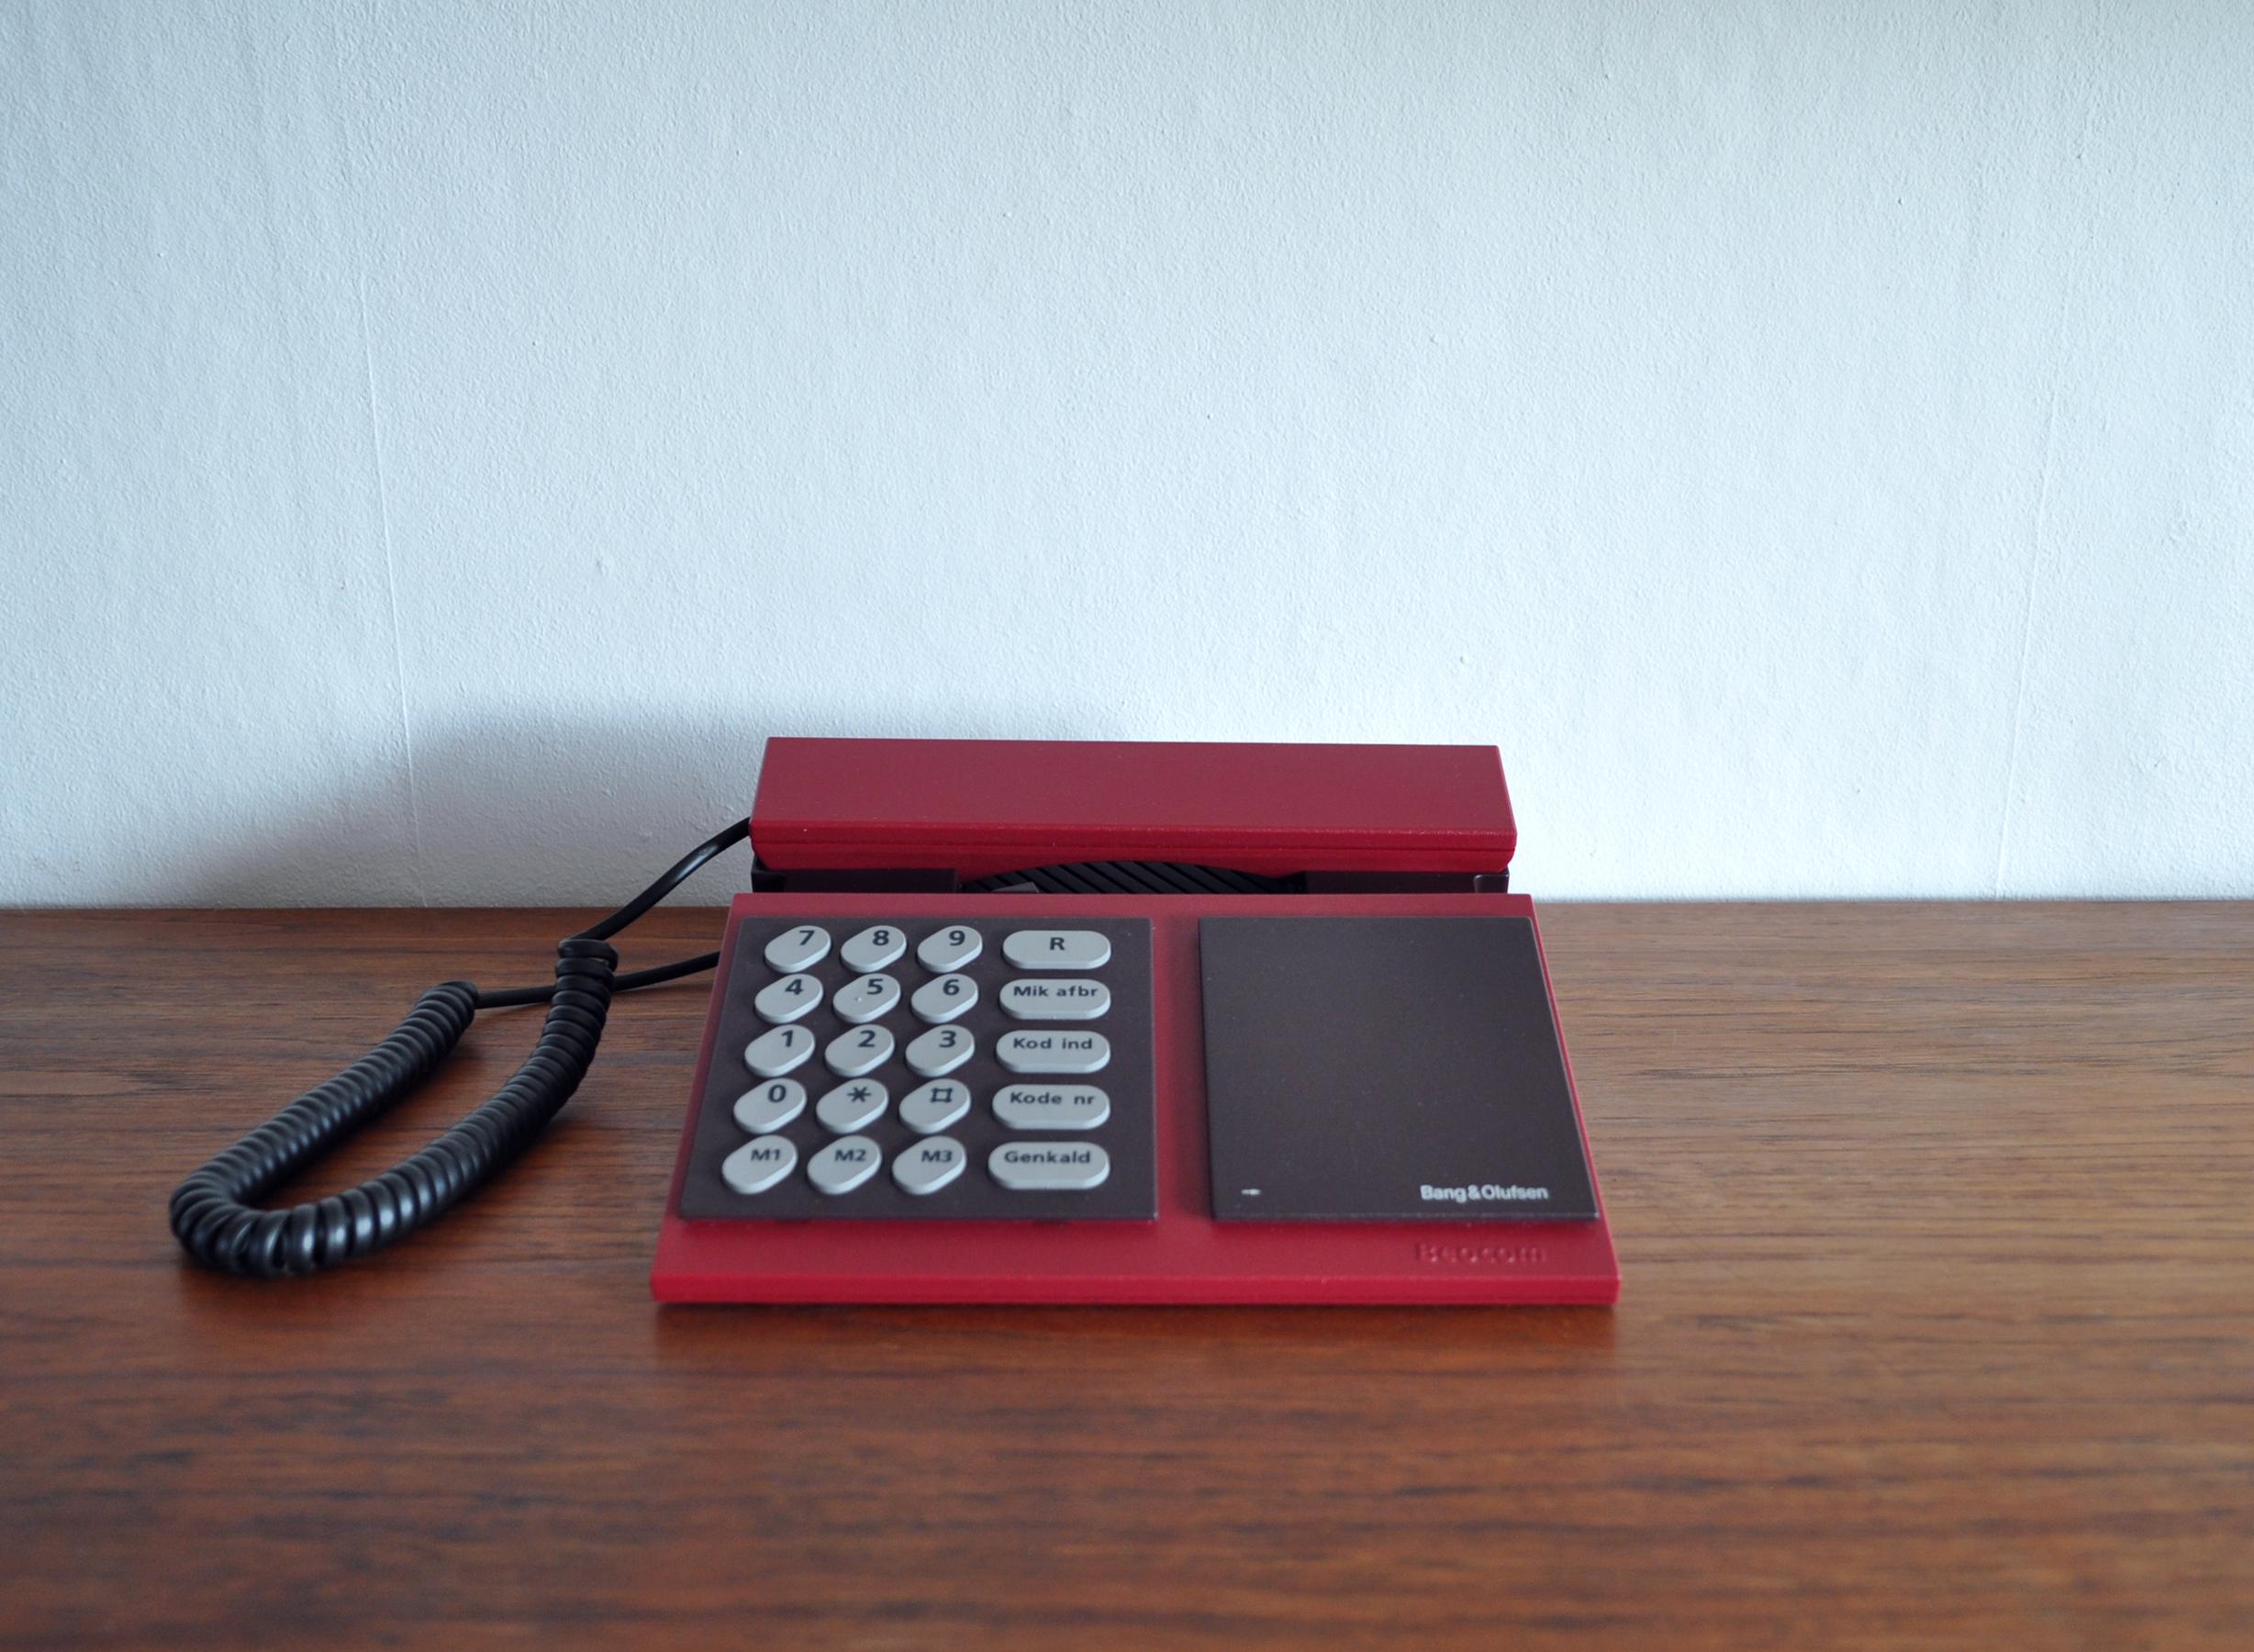 Beocom 600 telephone from 1986 by Bang & Olusfen in ruby color.
Fully functional.

History: 